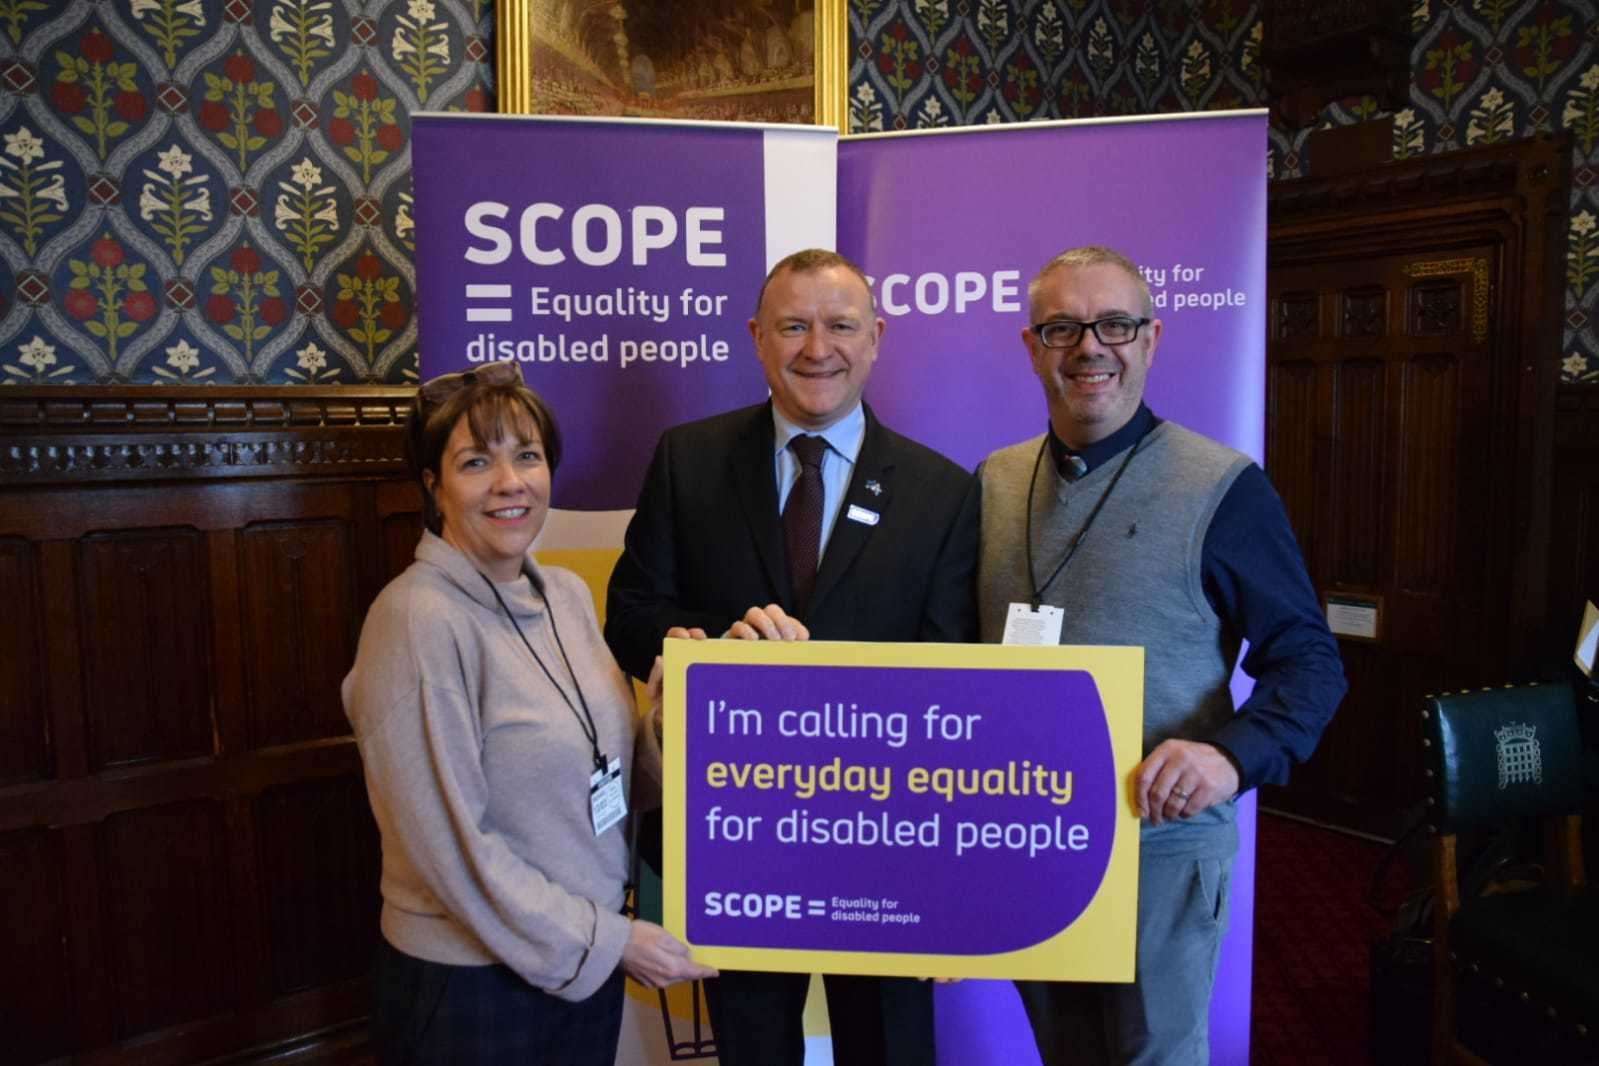 MP Drew Hnedry at the recent Scope drop-in event in parliament.